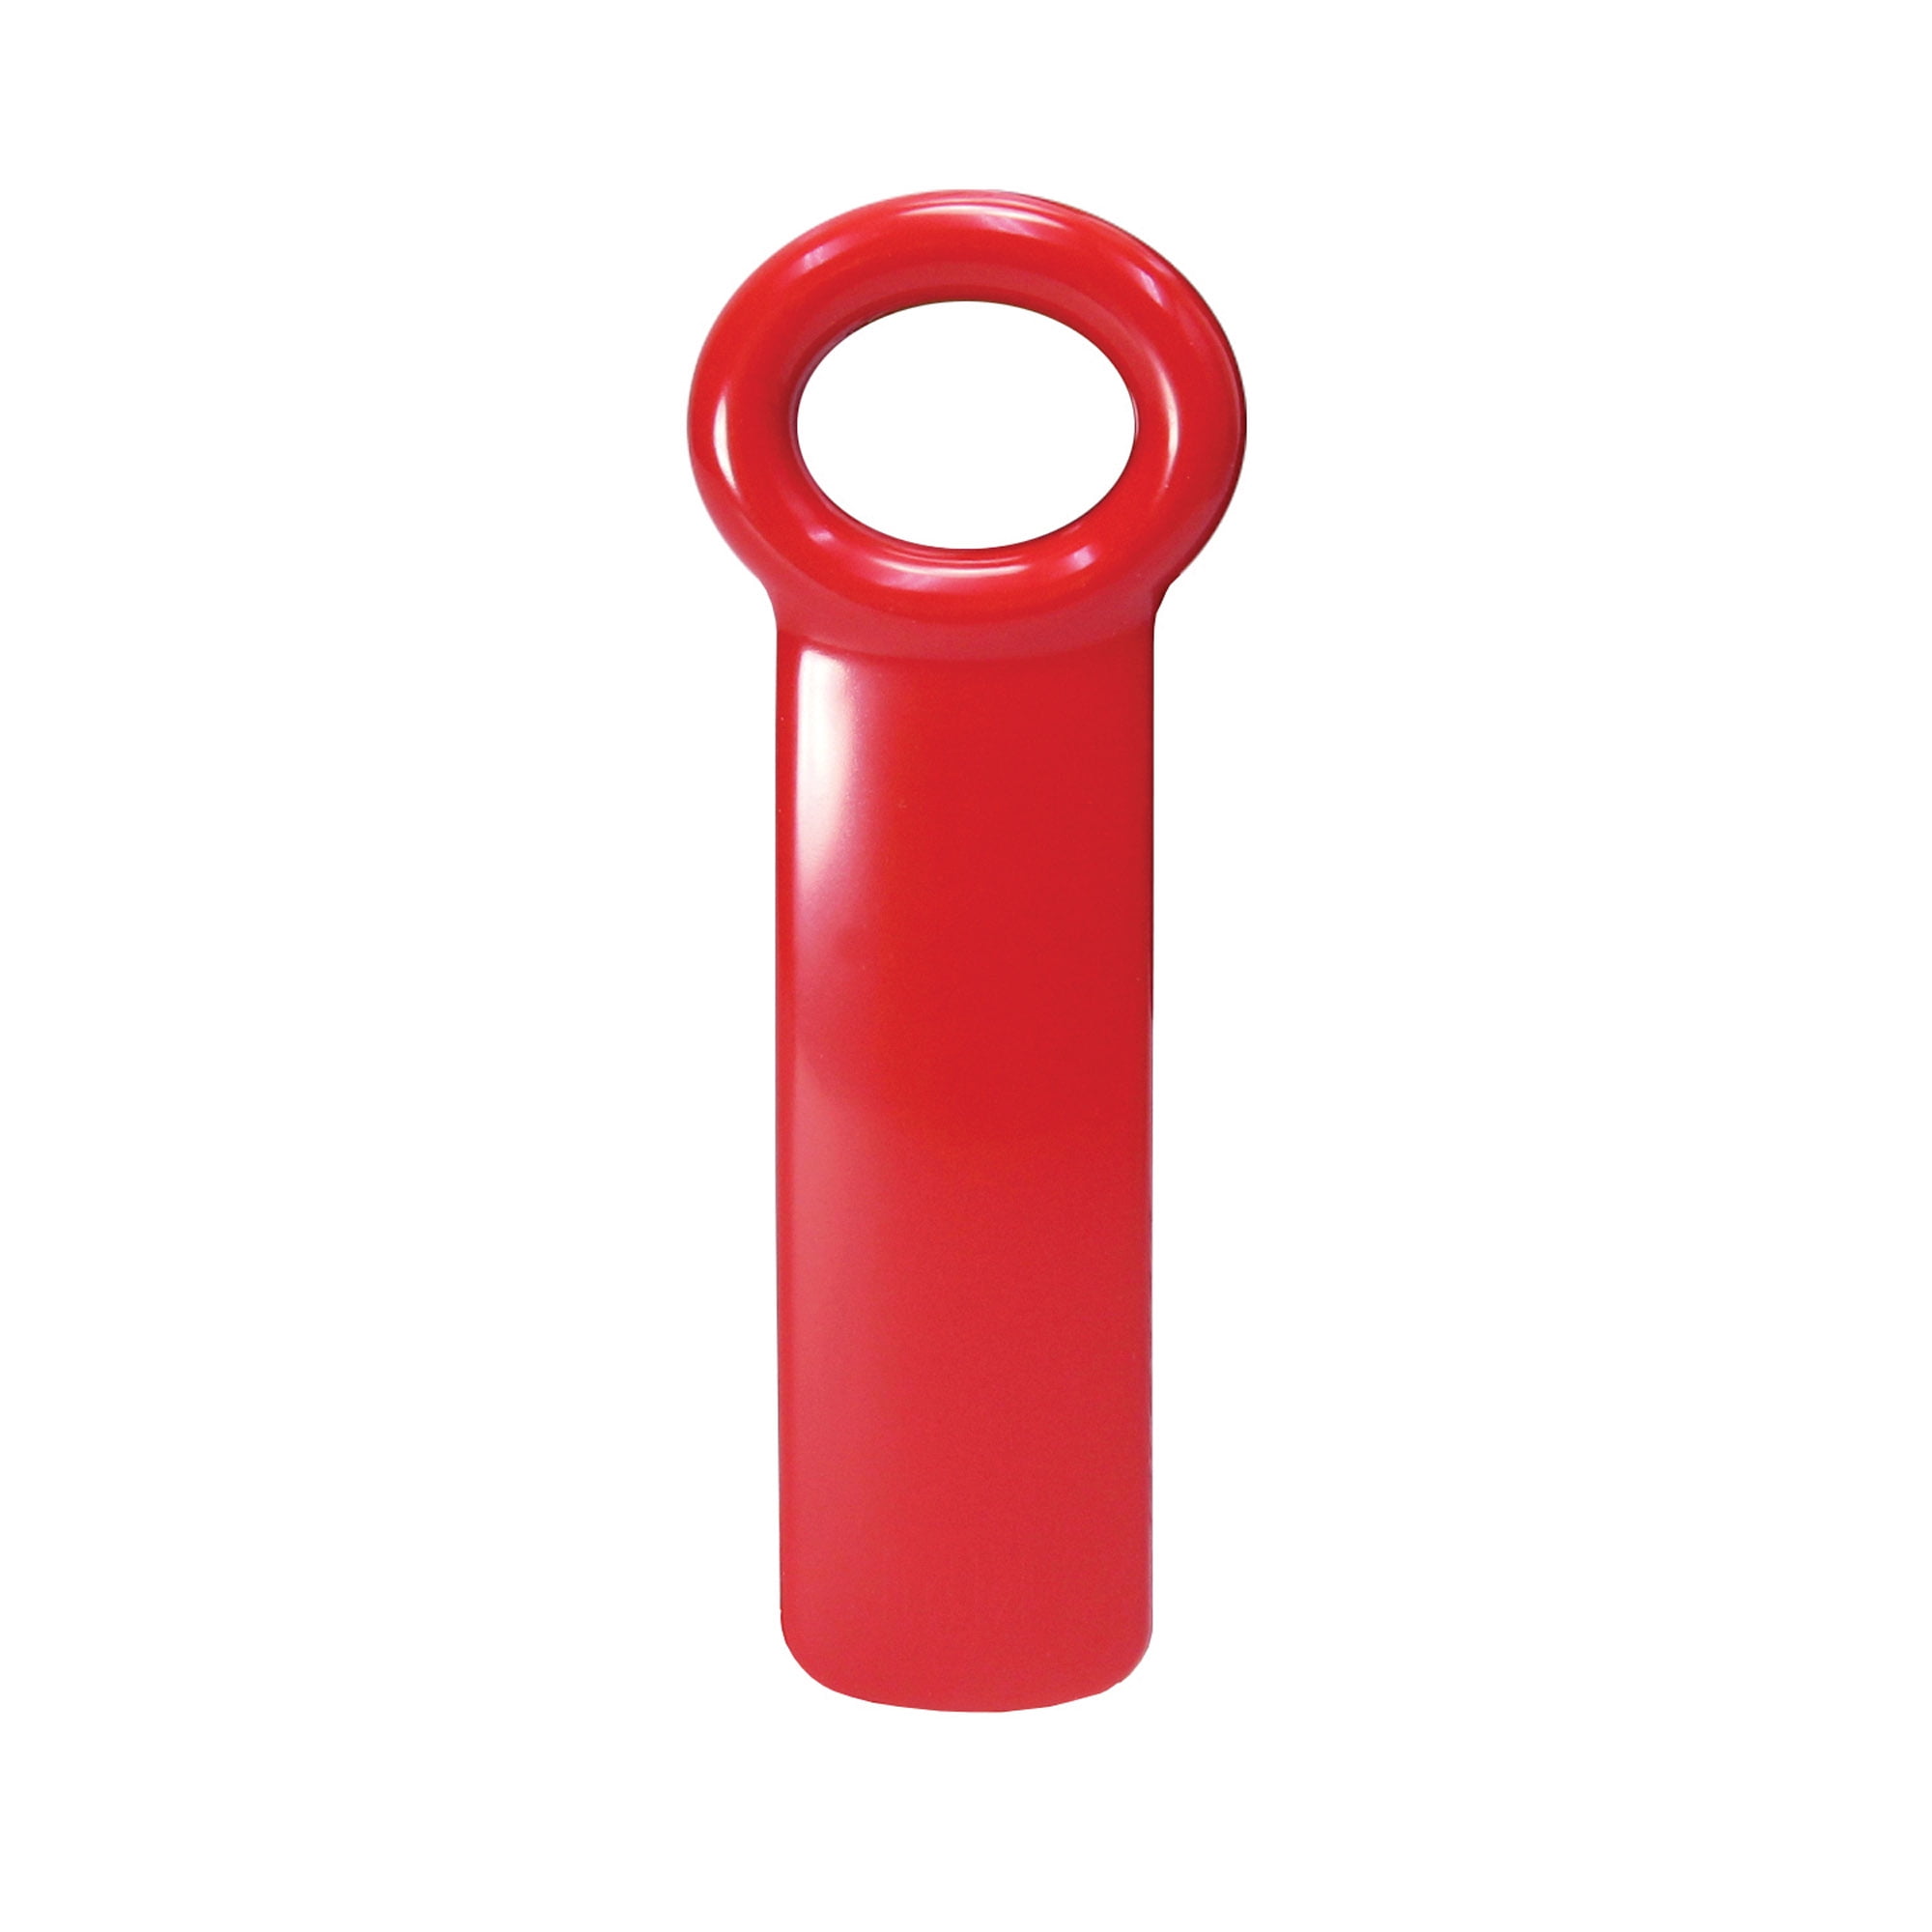 Easy Jar Key Opener, Great For Kids And Arthritis And Carpal Tunnel  Sufferers, Red, 5.62-Inches - AliExpress